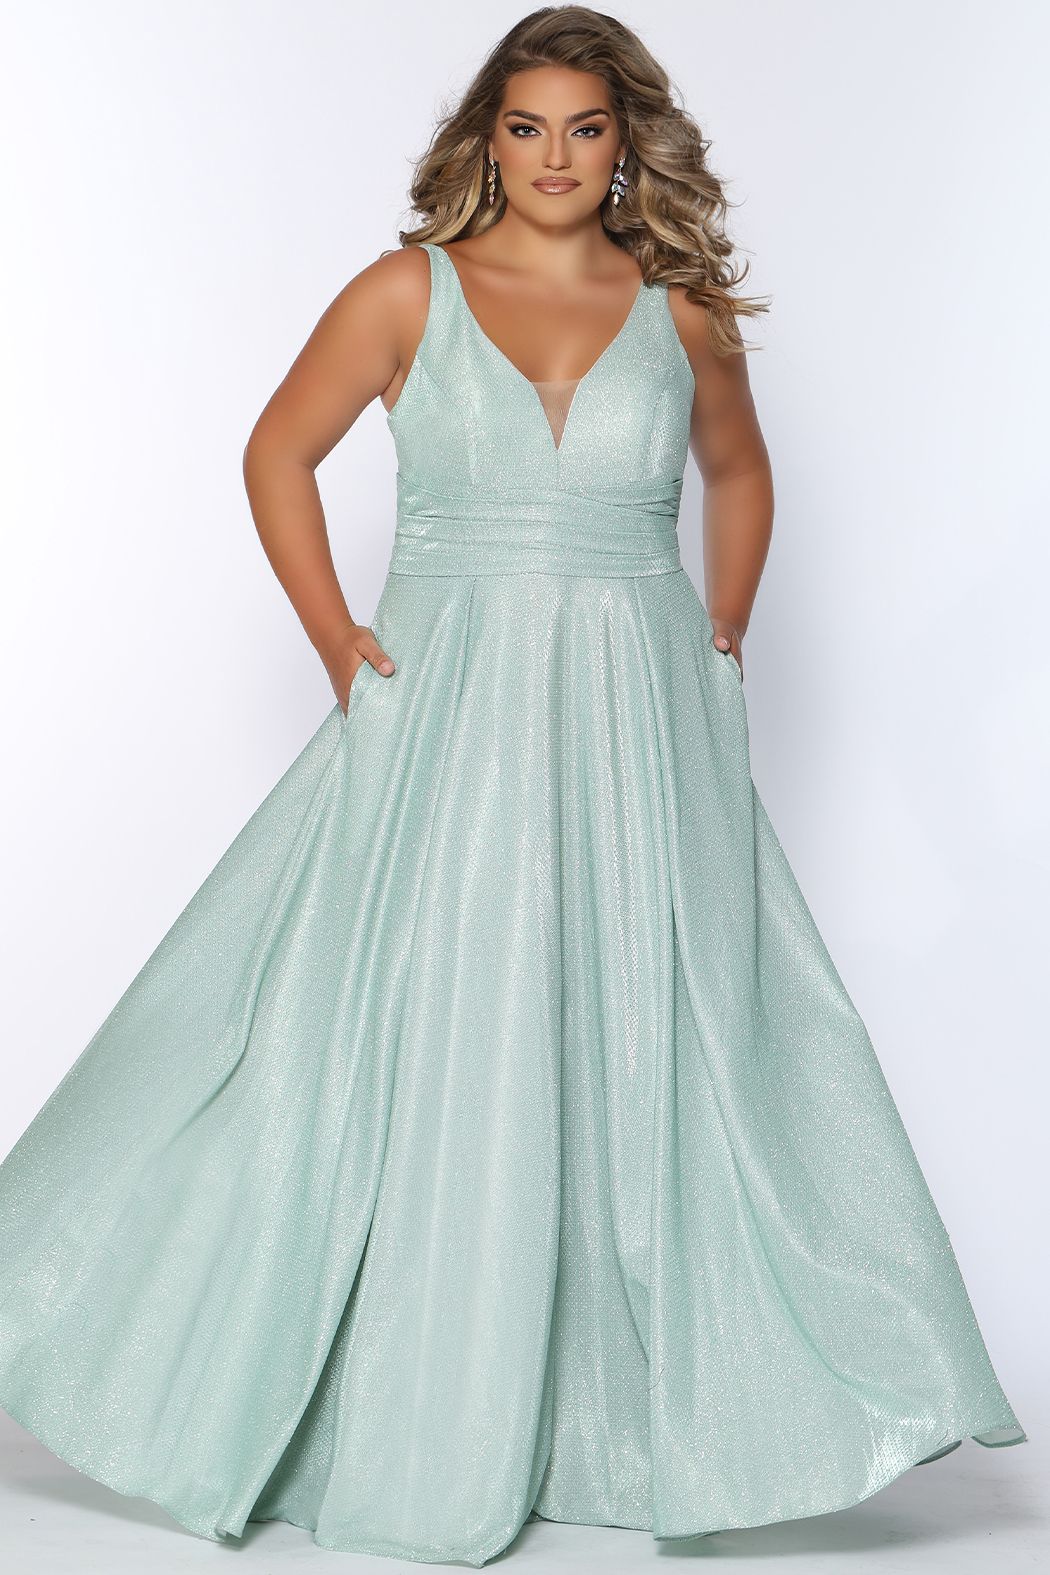 Sydney's Closet SC7324 Shimmer in a sweet metallic gown! These trending colors for Prom 2022 are perfect in Capri, Orchid, and Sage, with a knit fabric that will glide across your body, and the dance floor. It’s a classic a line v neck style, pumped up with fashion details including a pleated waistline and folds in the skirt. Must-have additions of bra-friendly straps and pockets! SC 7324